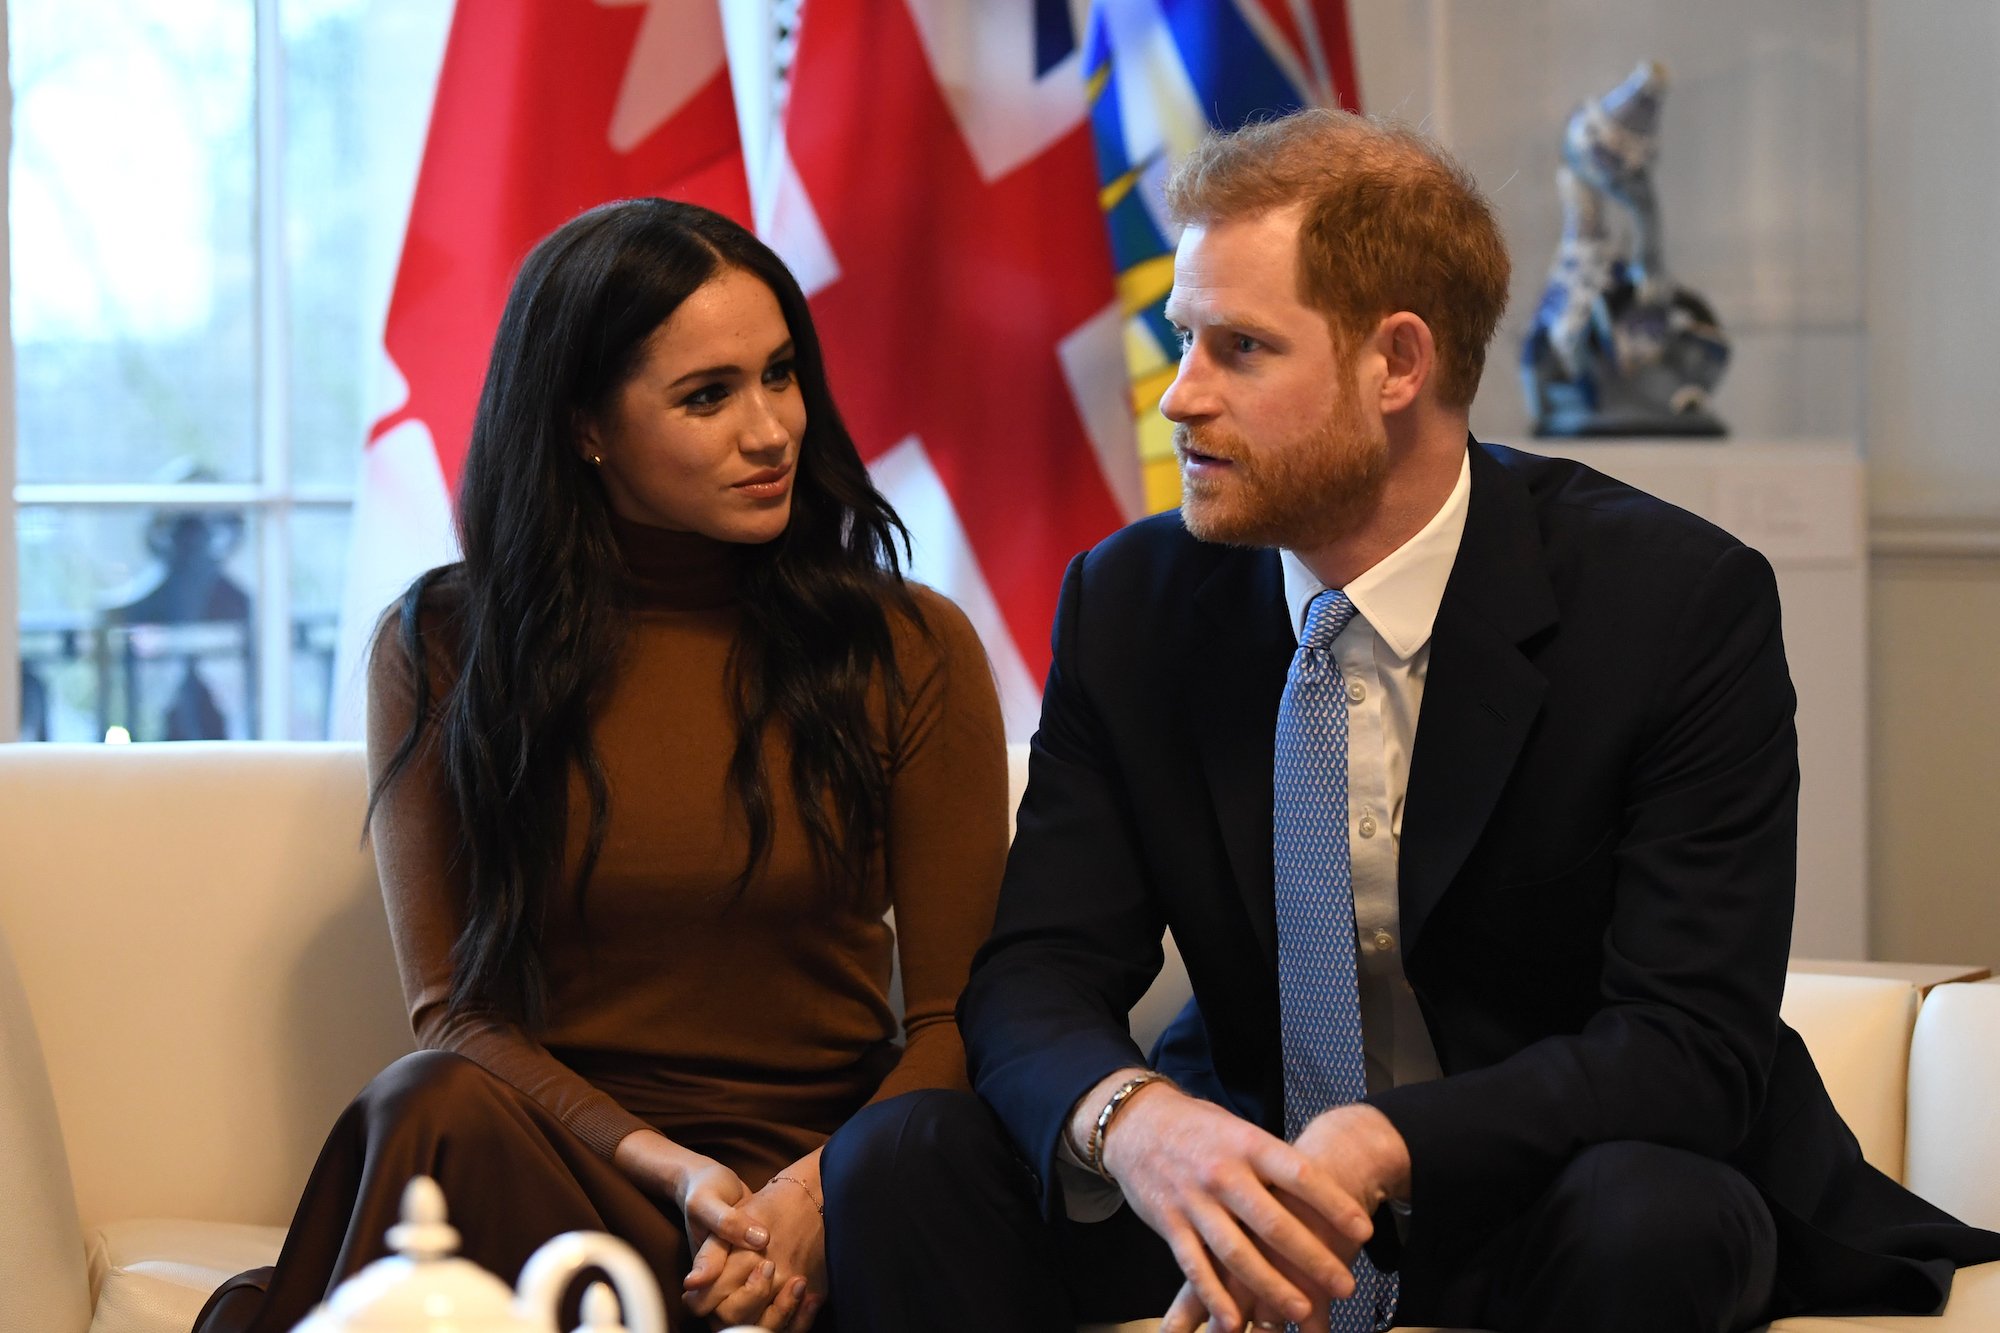 (L-R) Meghan Markle and Prince Harry smiling, seated next to each other in front of a blurred background